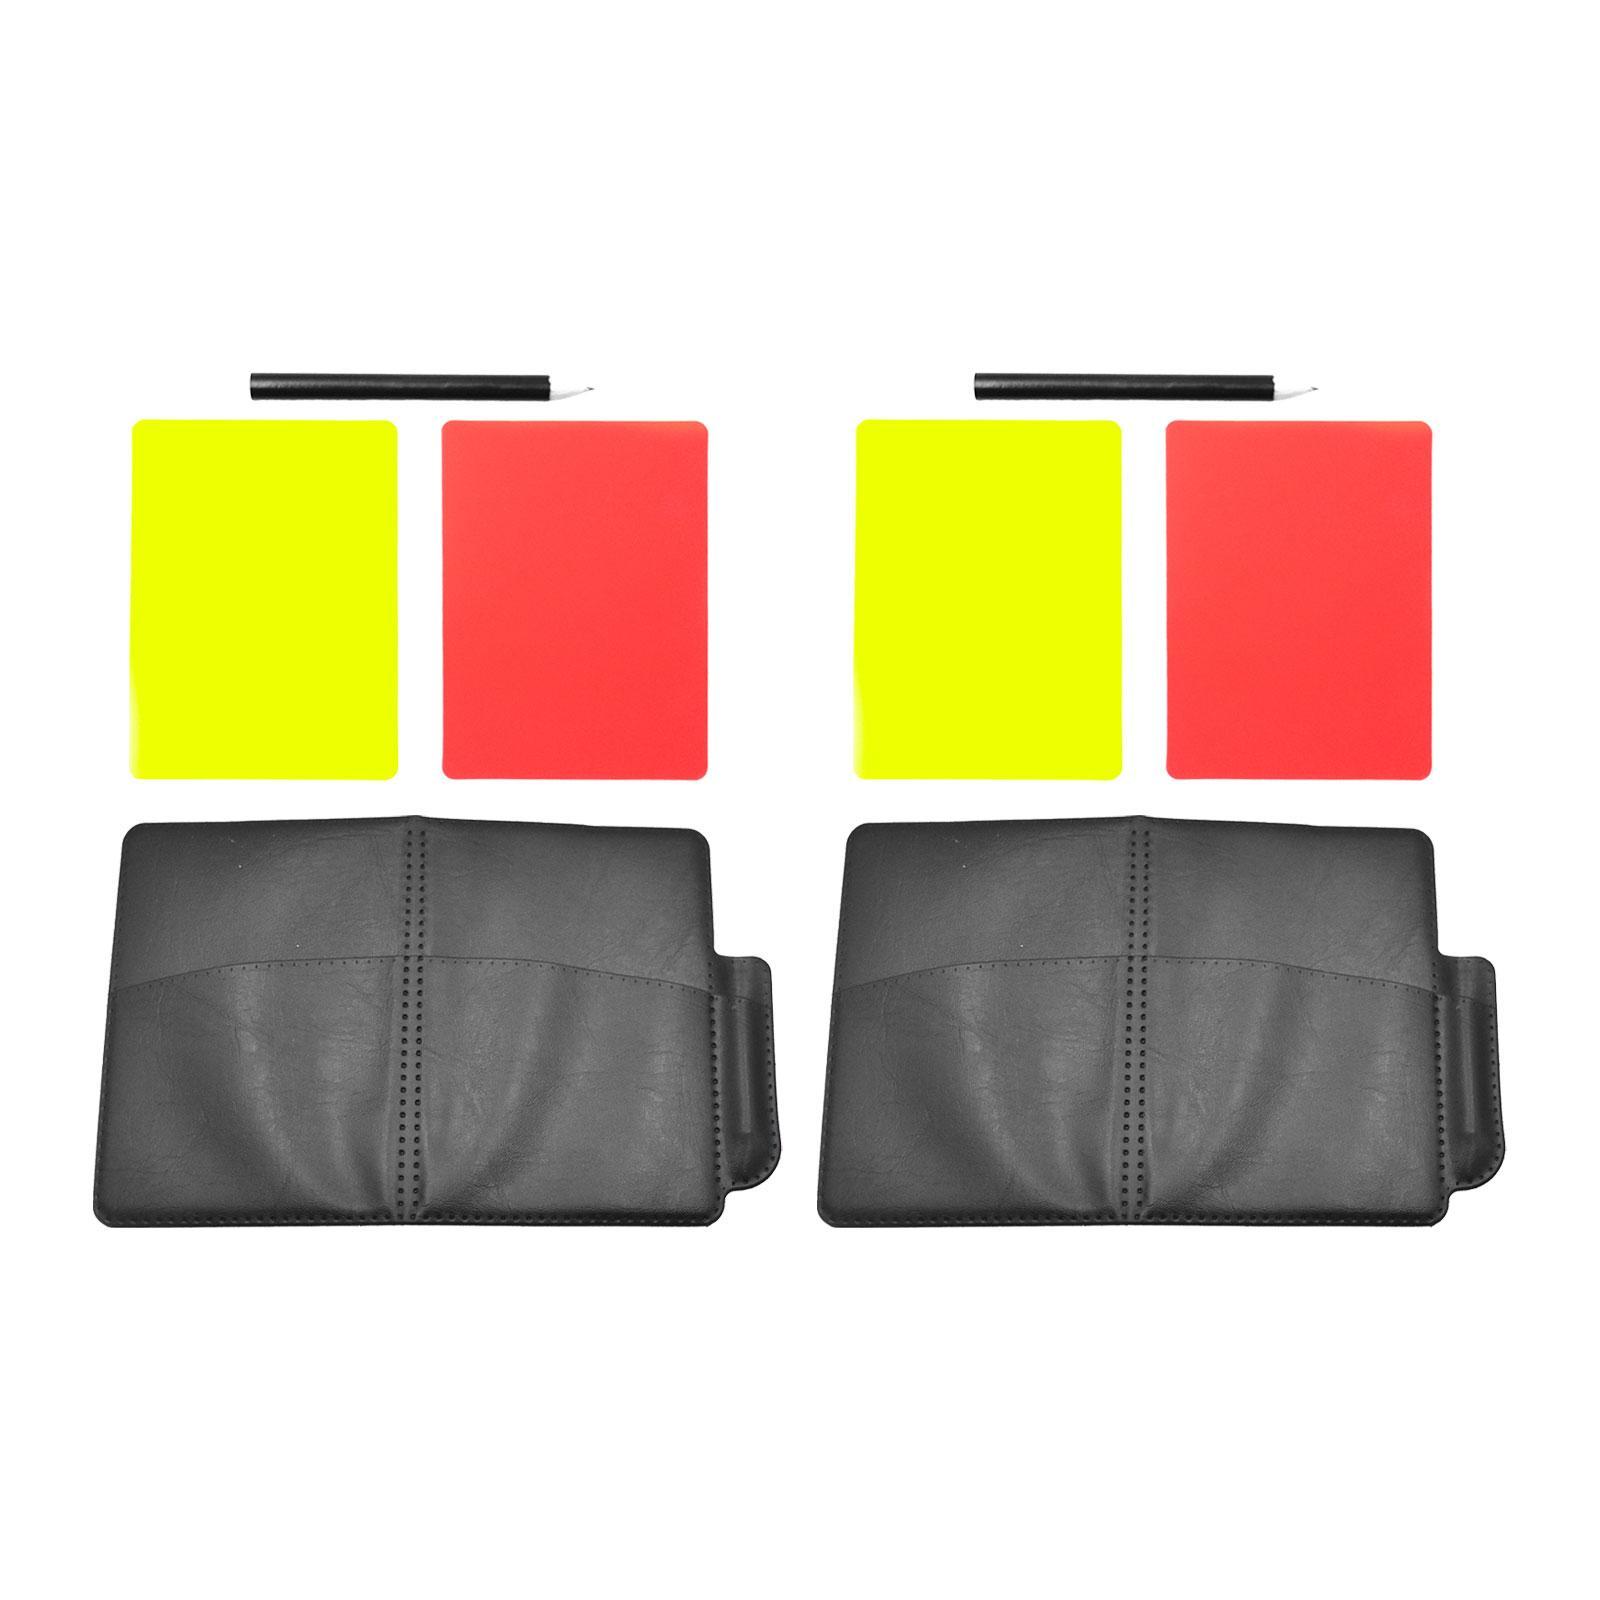 Soccer Referee Card Sets Referee Cards for Football Soccer Outdoor Sports